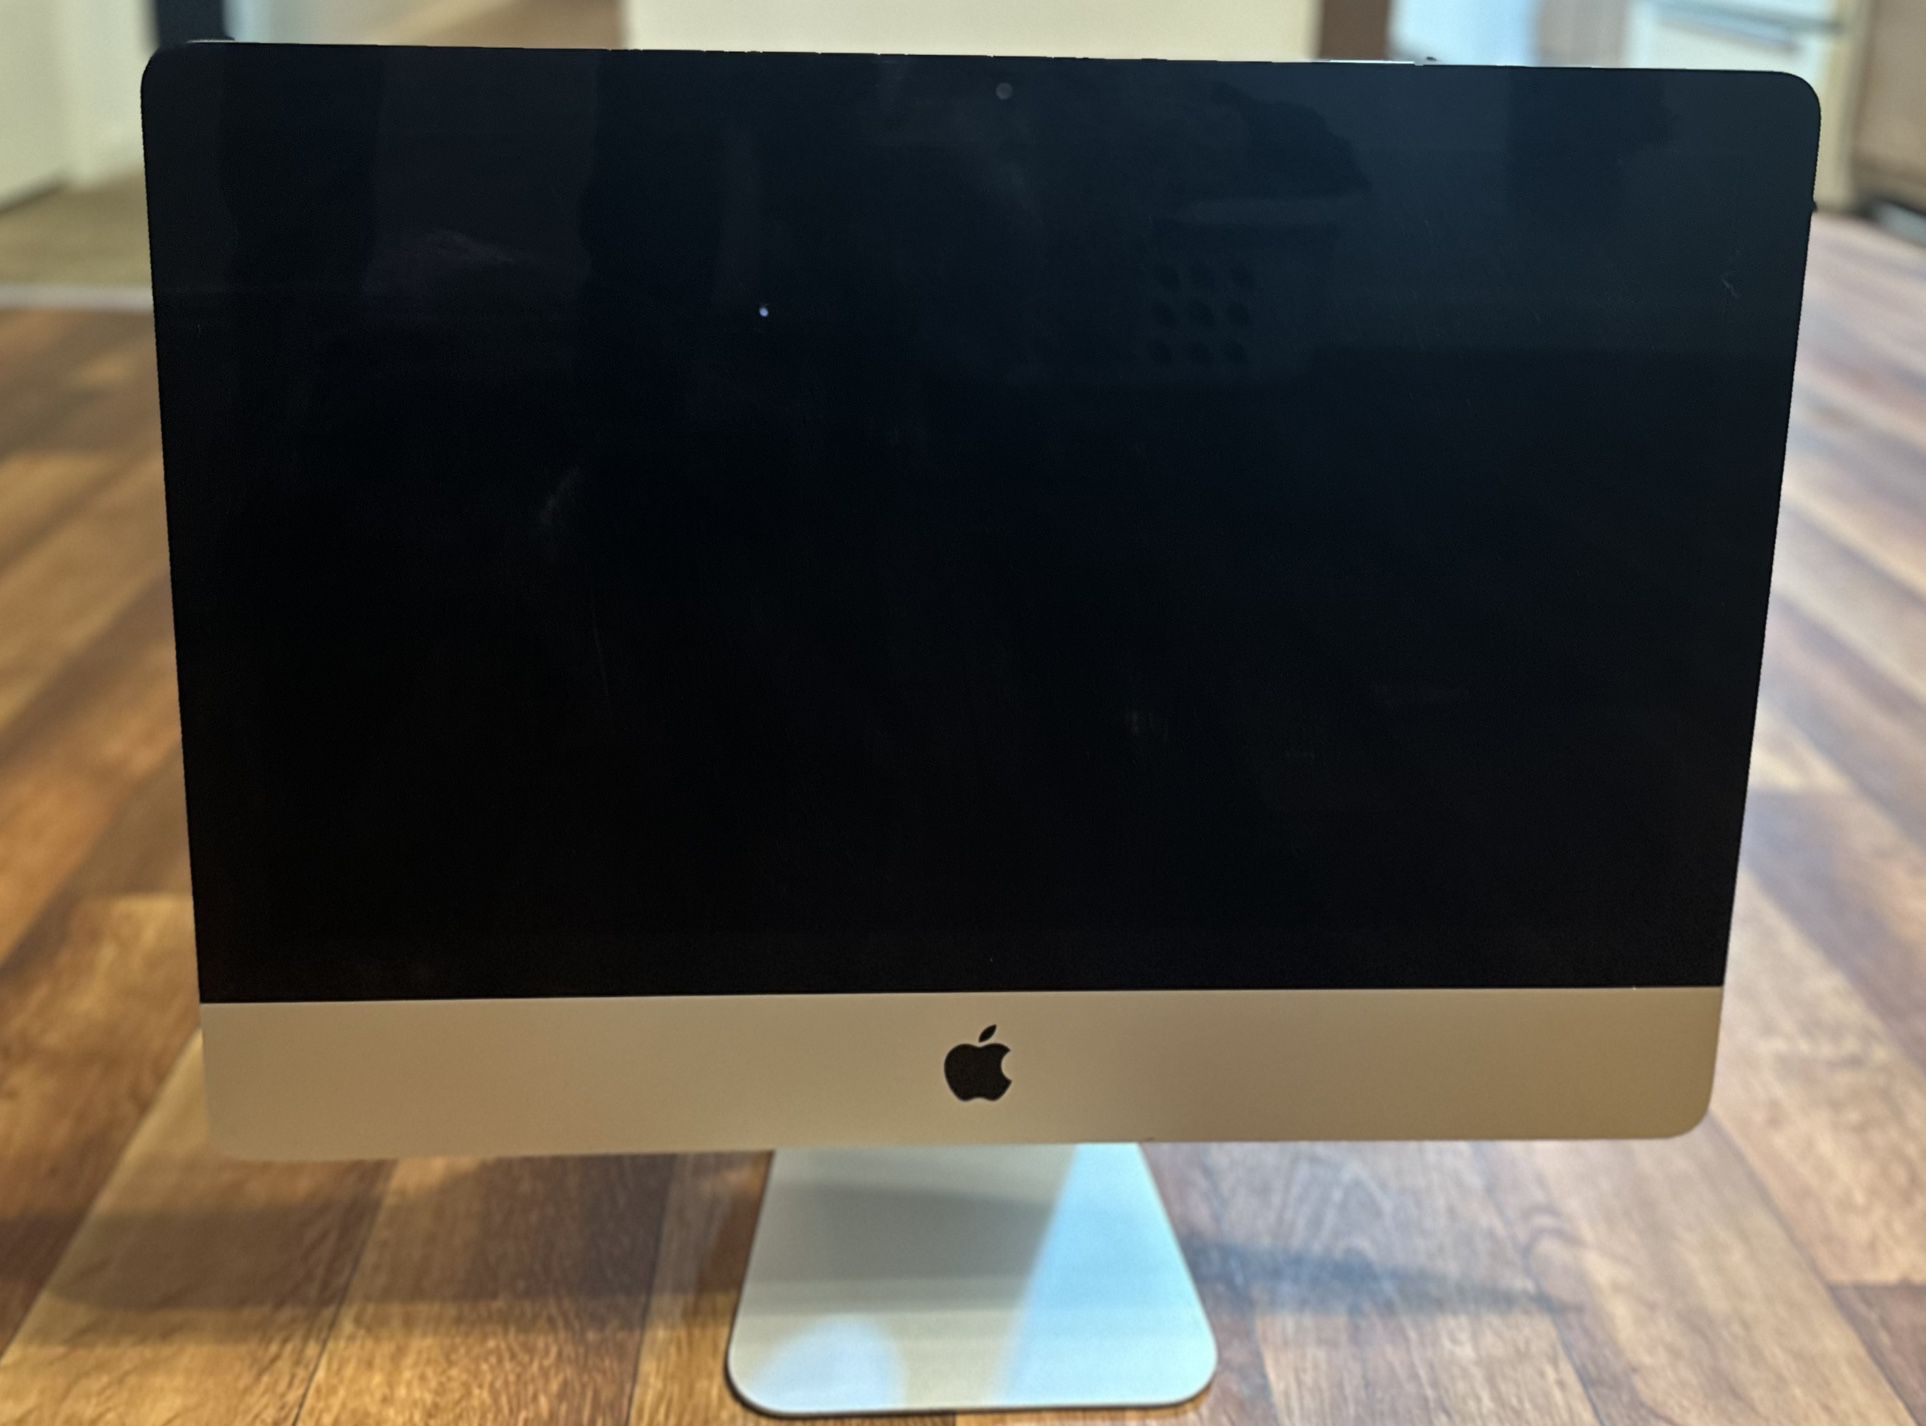 iMac 21.5 Inch 1TB (Late 2012) With Bluetooth Mouse & Keyboard